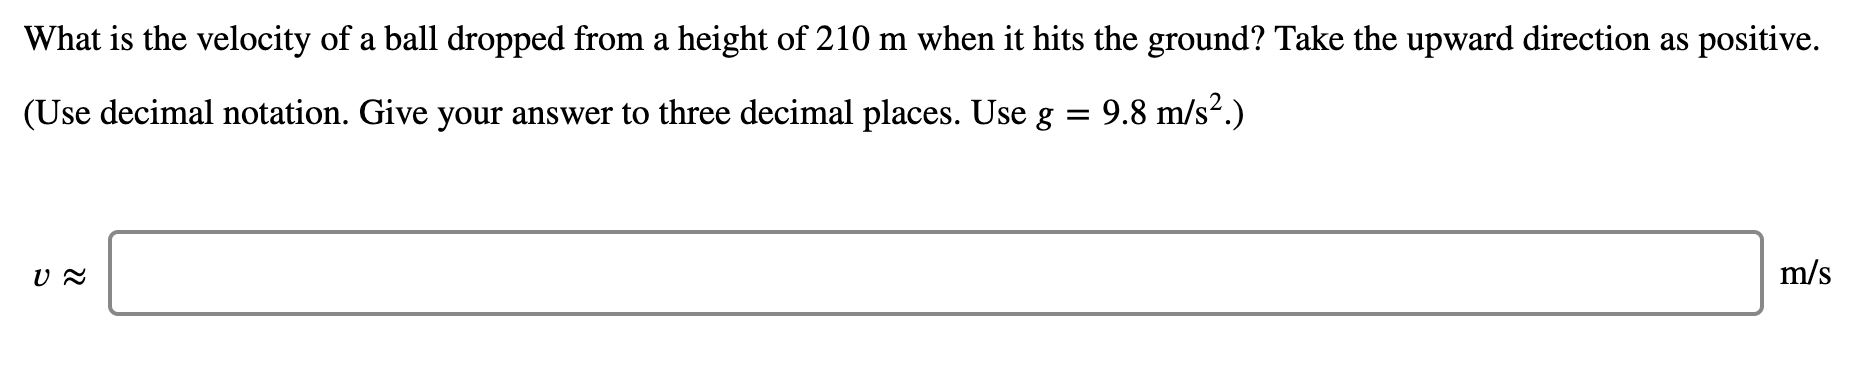 What is the velocity of a ball dropped from a height of 210 m when it hits the ground? Take the upward direction as positive.
(Use decimal notation. Give your answer to three decimal places. Use g
9.8 m/s?.)
m/s
